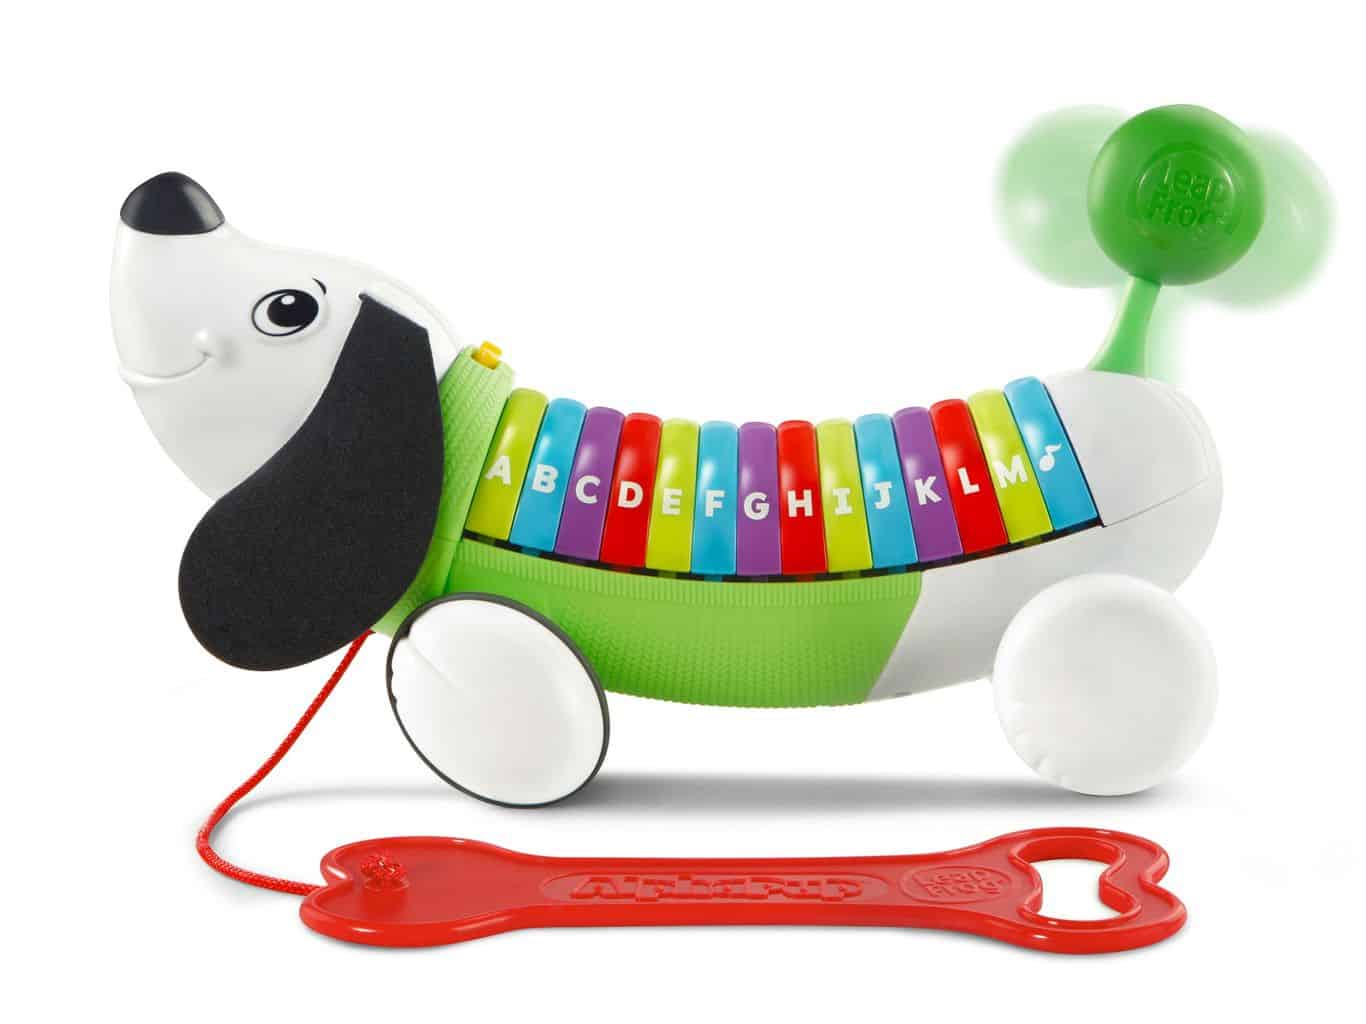 Popular AlphaPup Toy Says 'What At The Door?'